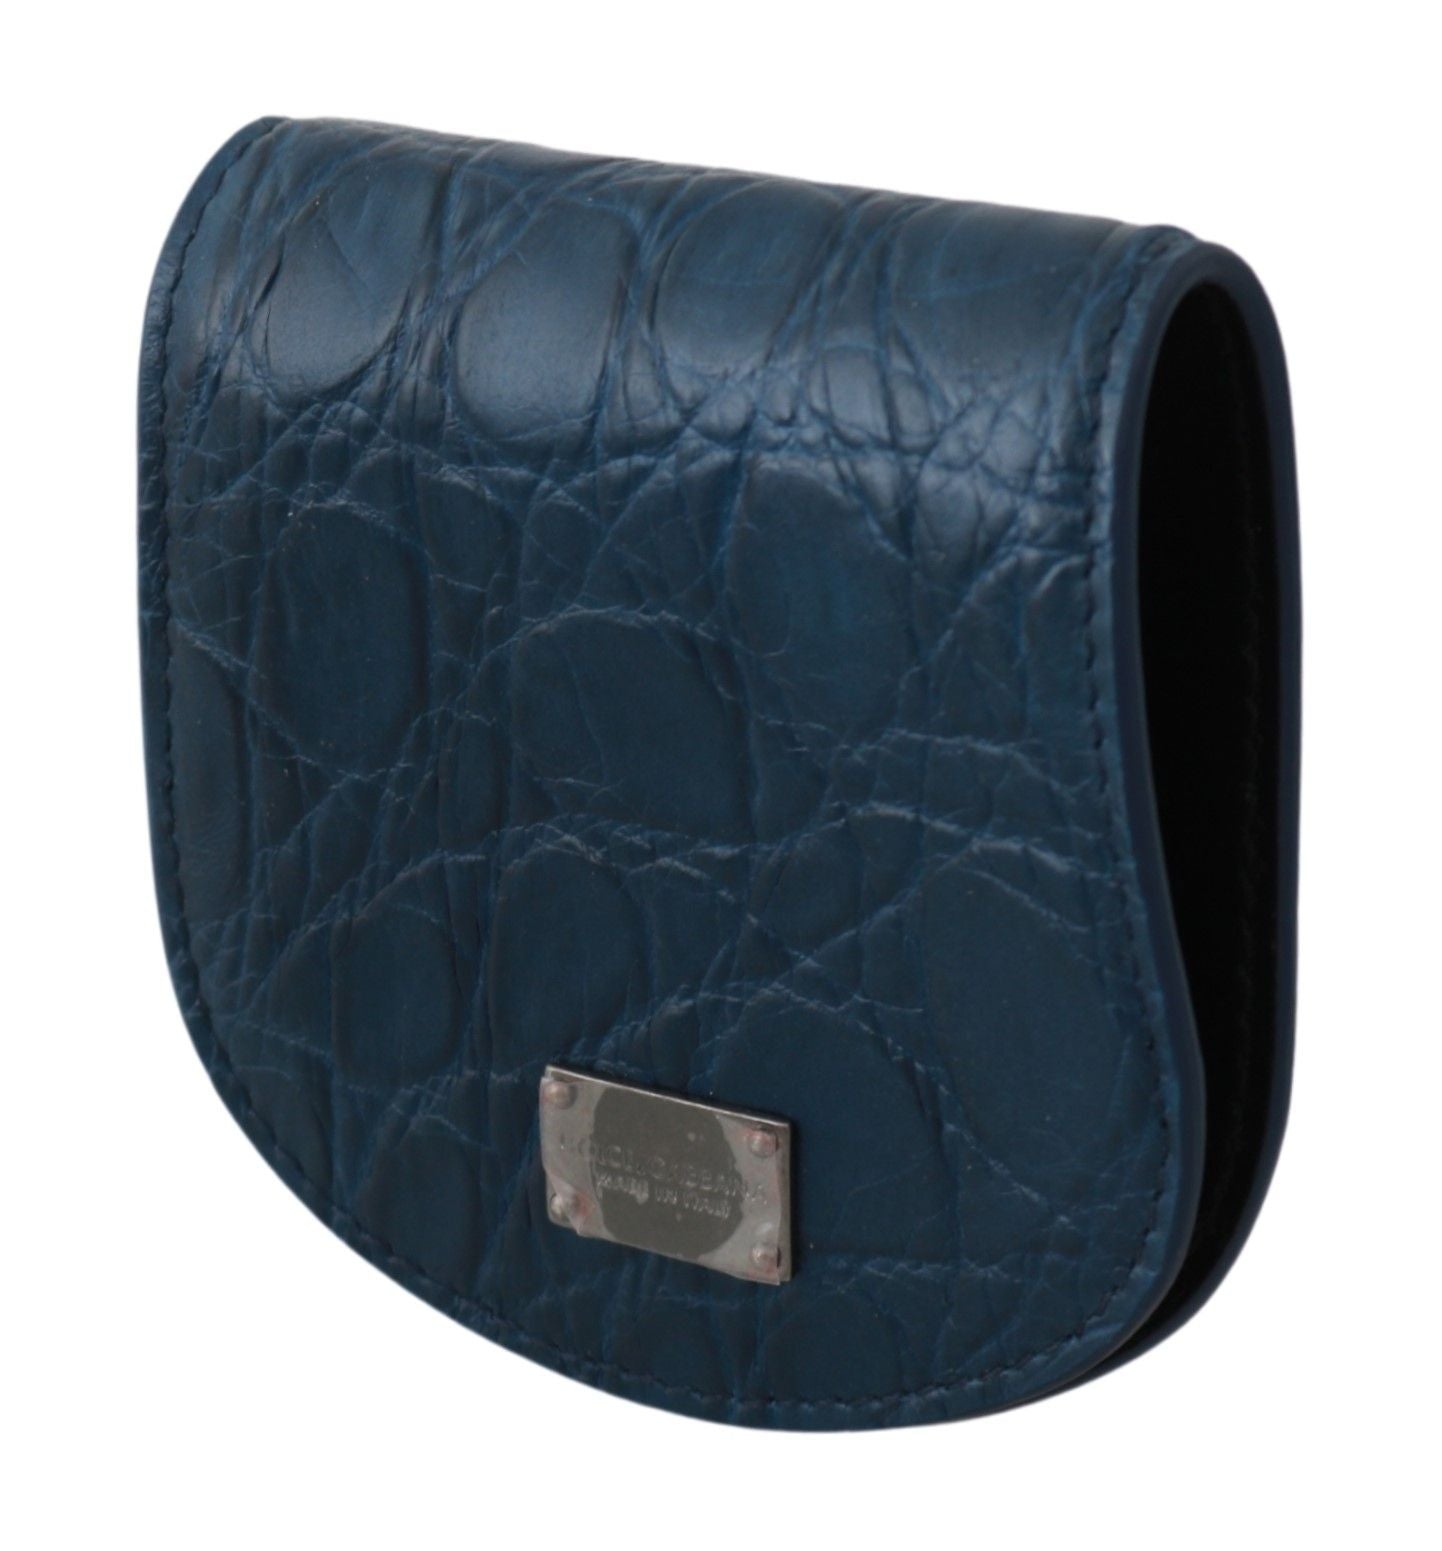 Blue Leather Holder Pocket Condom Case - Designed by Dolce & Gabbana Available to Buy at a Discounted Price on Moon Behind The Hill Online Designer Discount Store